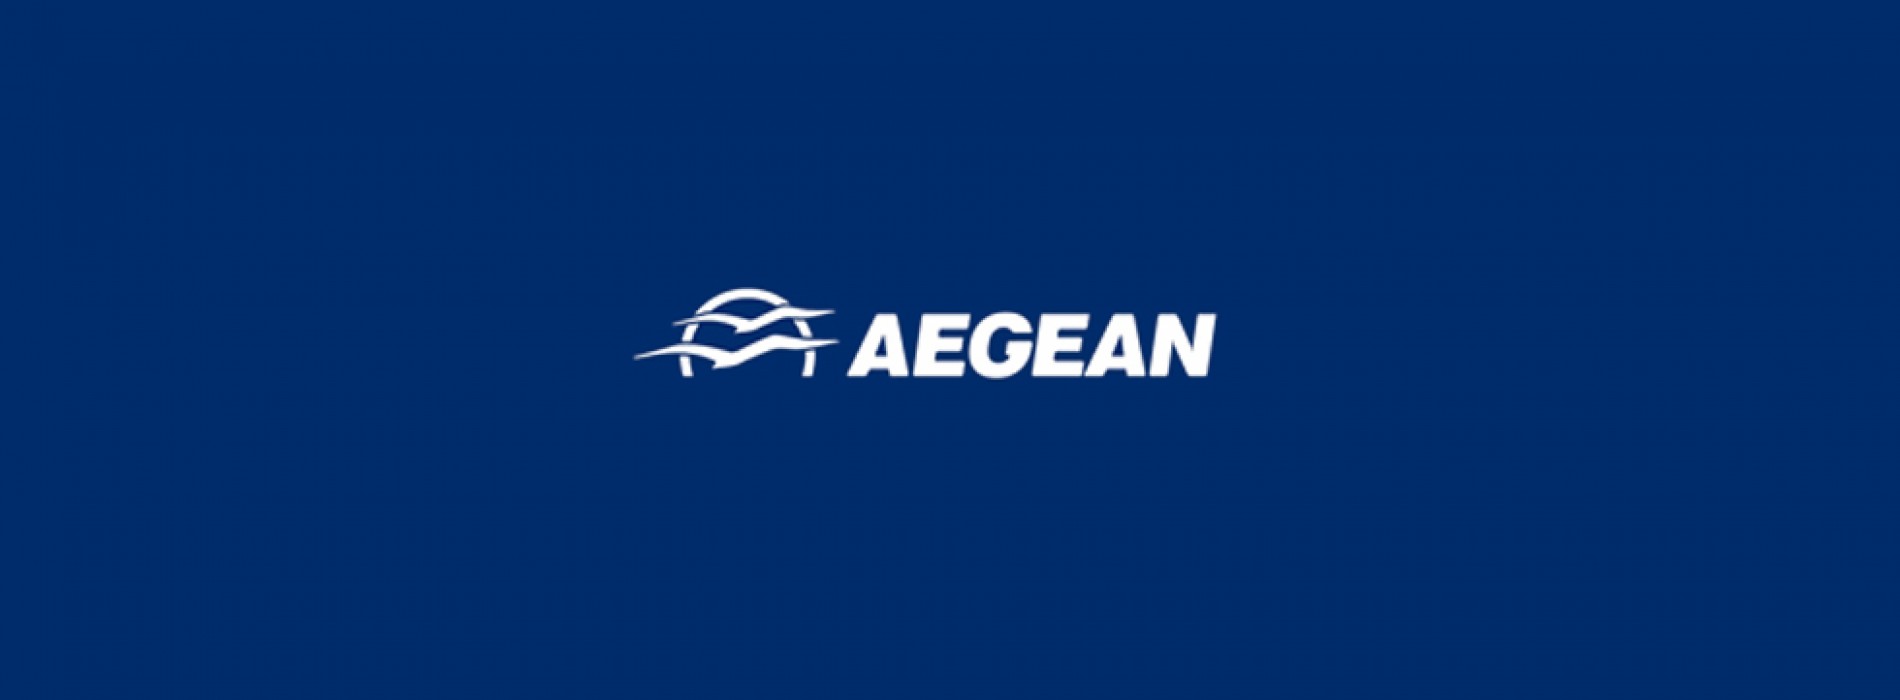 Aegean Airlines to implement Sabre AirVision Revenue Optimizer, enabling real-time revenue management